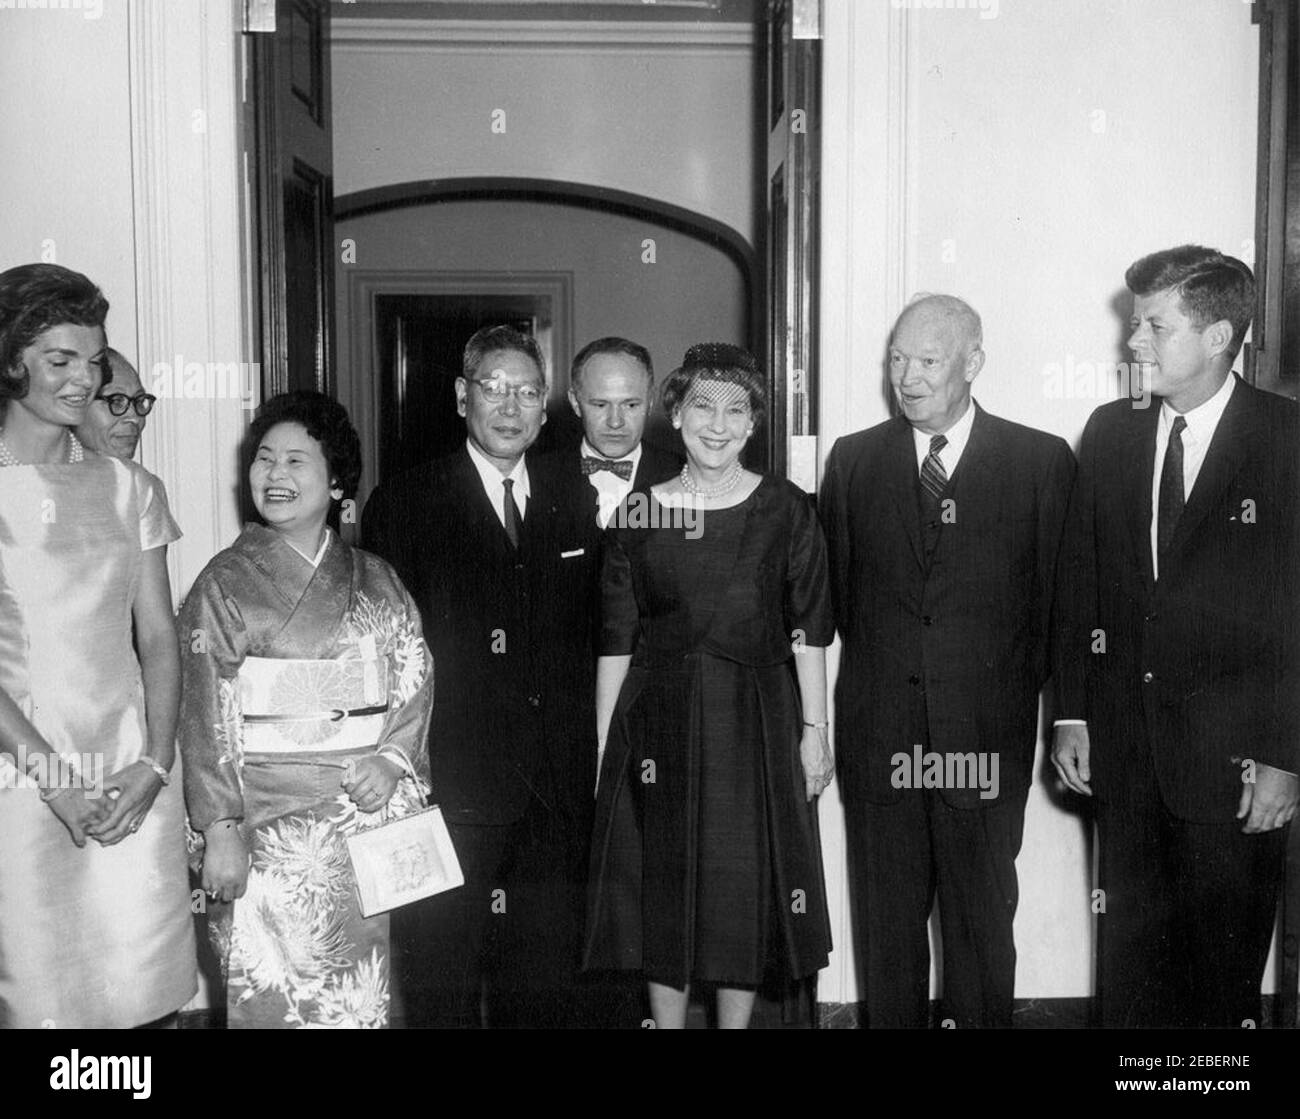 Luncheon in honor of Hayato Ikeda, Prime Minister of Japan, 1:00 PM. Luncheon in honor of Prime Minister of Japan Hayato Ikeda. (L-R) First Lady Jacqueline Kennedy, Counselor of the Ministry of Foreign Affairs Toshiro Shimanouchi, Mitsue Ikeda, Prime Minister of Japan Hayato Ikeda, interpreter James J. Wickel, former First Lady Mamie Doud Eisenhower, former President Dwight D. Eisenhower, and President John F. Kennedy. North Portico, White House, Washington, D.C. Stock Photo